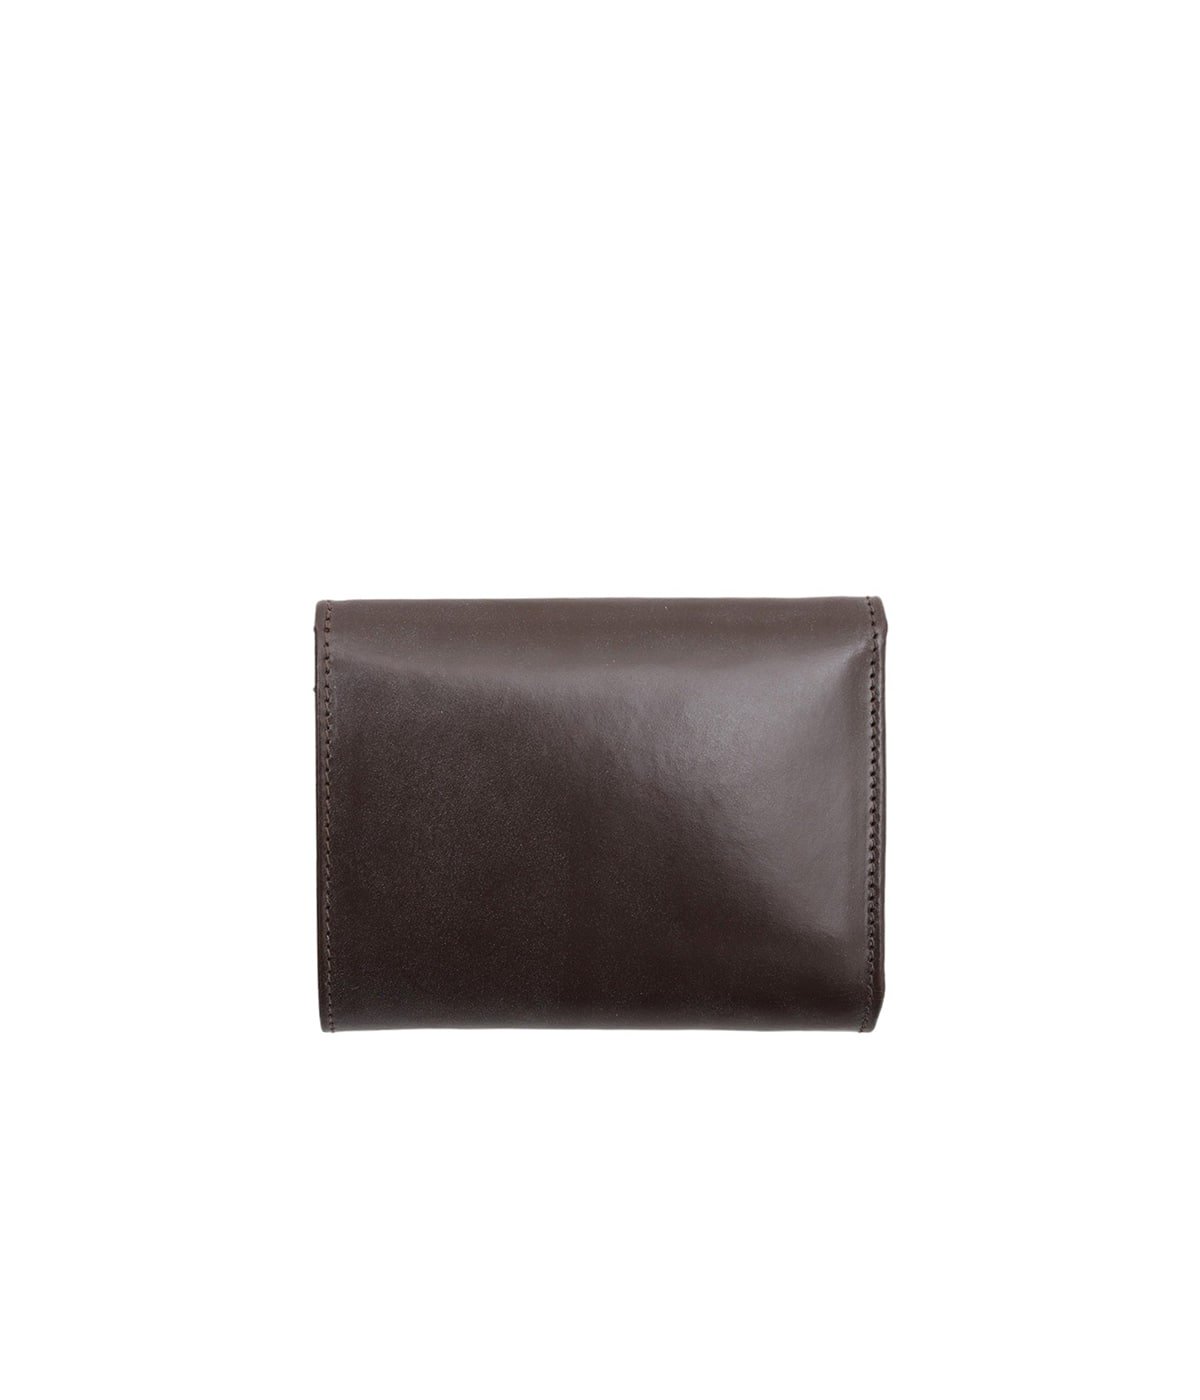 BRIDLE LEATHER TURNED EDGE 3FOLD WALLET | BEORMA LEATHER COMPANY